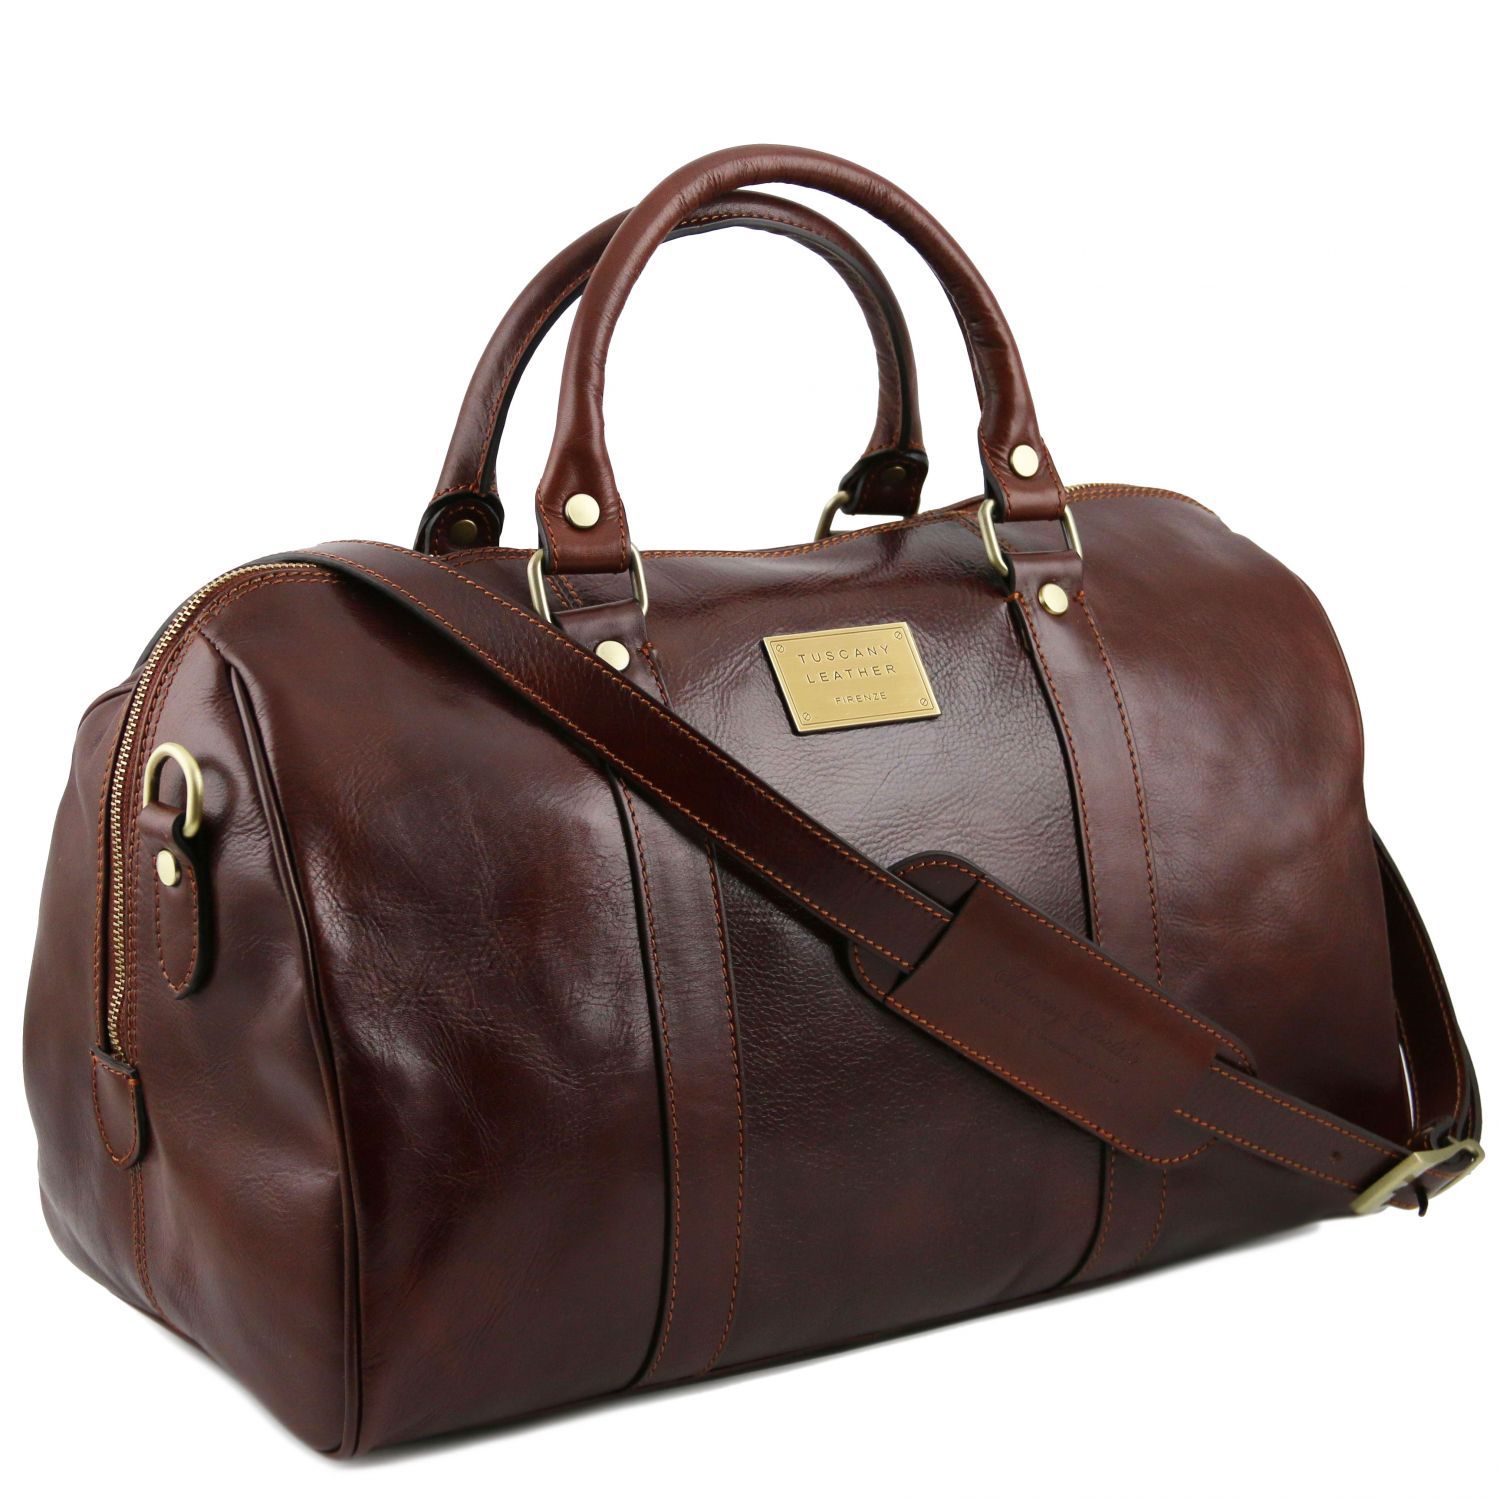 tl voyager travel leather duffle bag